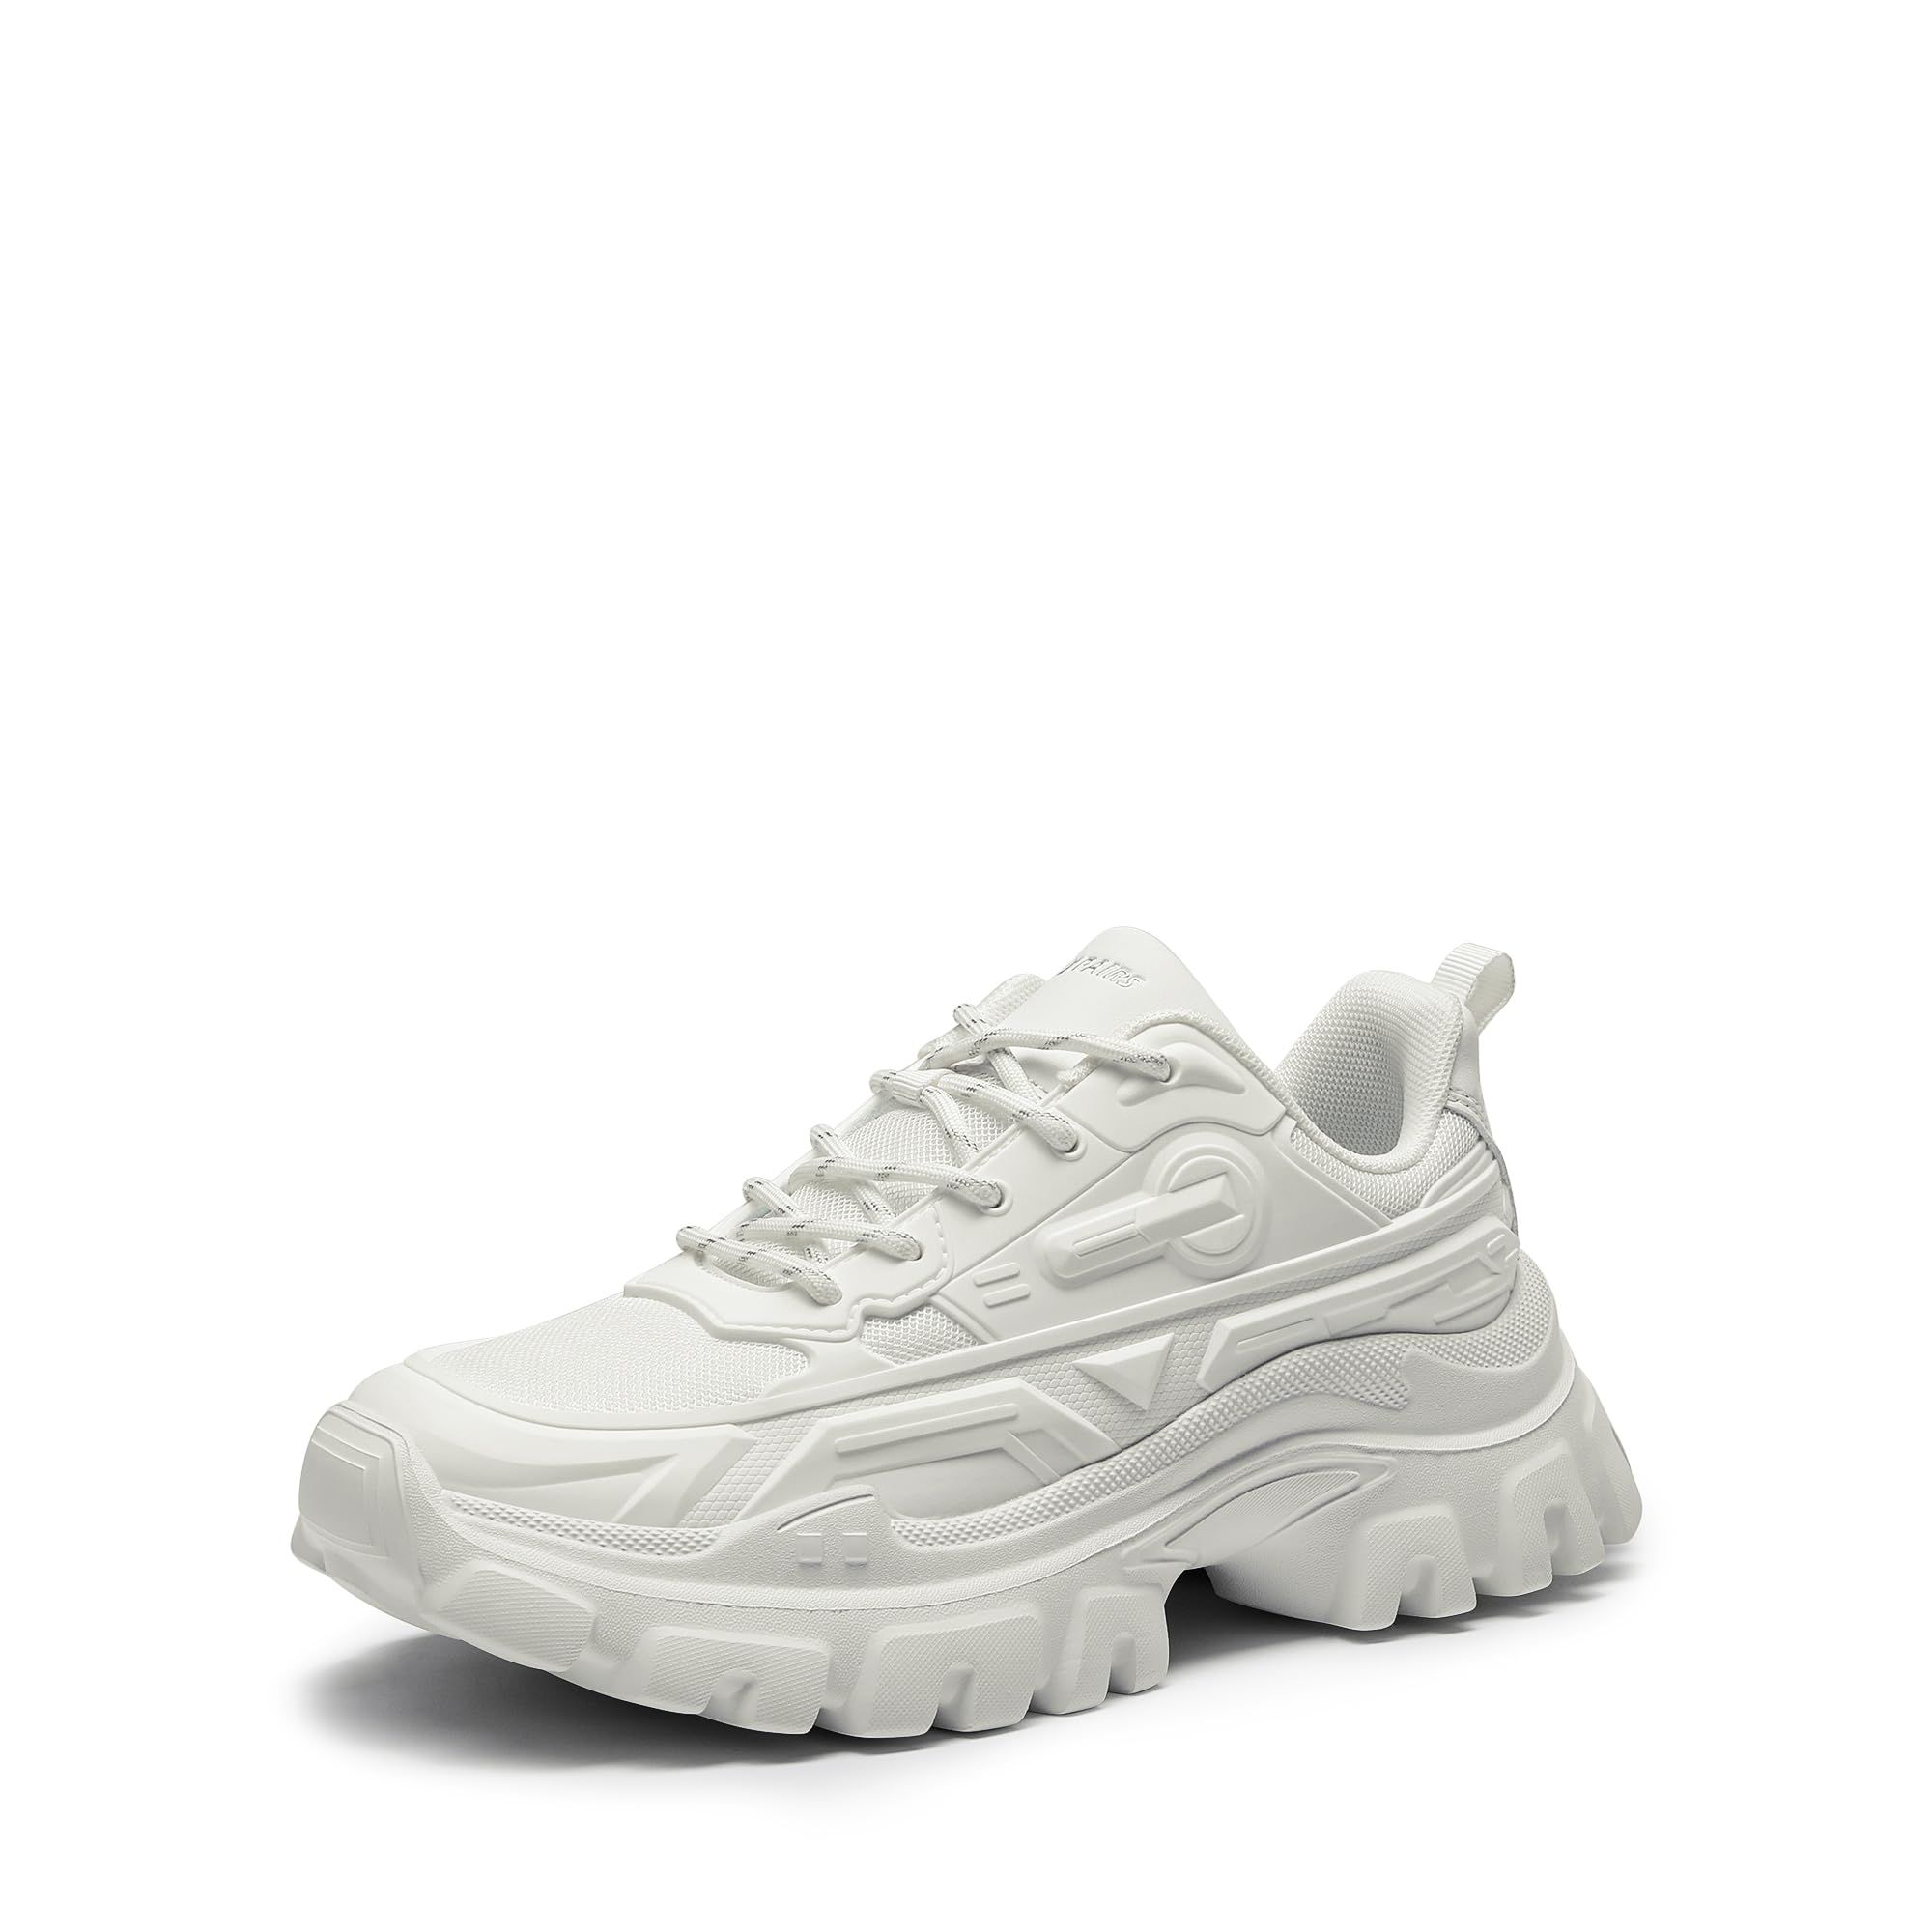 Truffle Collection chunky sole sneakers in white | ASOS